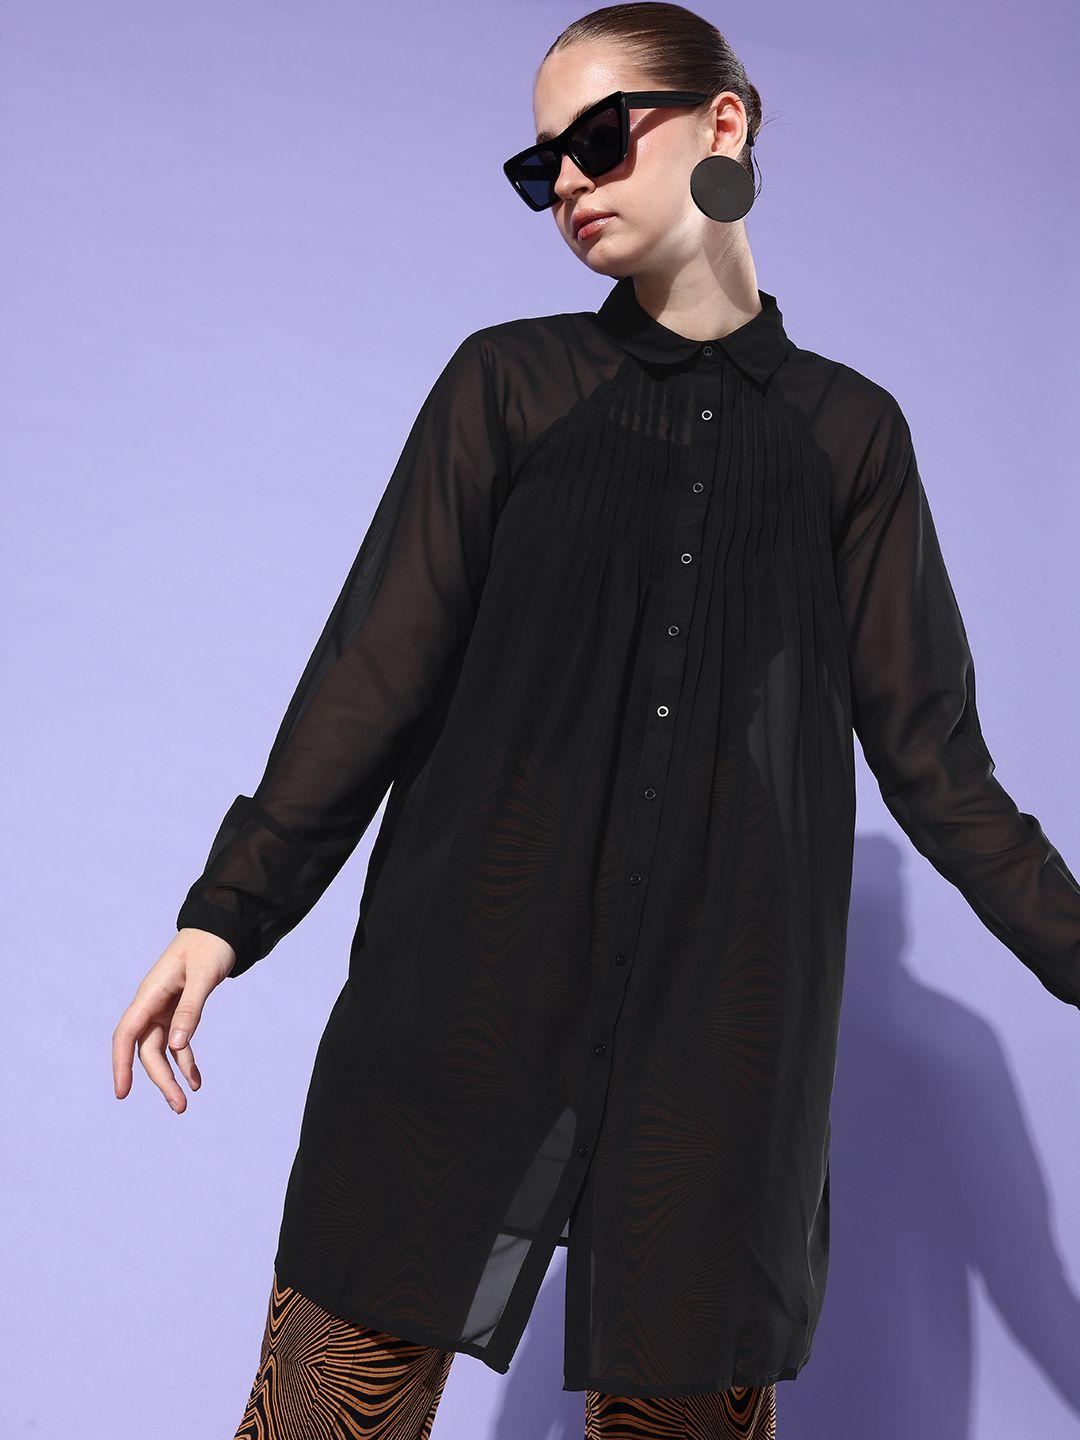 The Roadster Life Co. Solid Semi Sheer Longline Casual Shirt